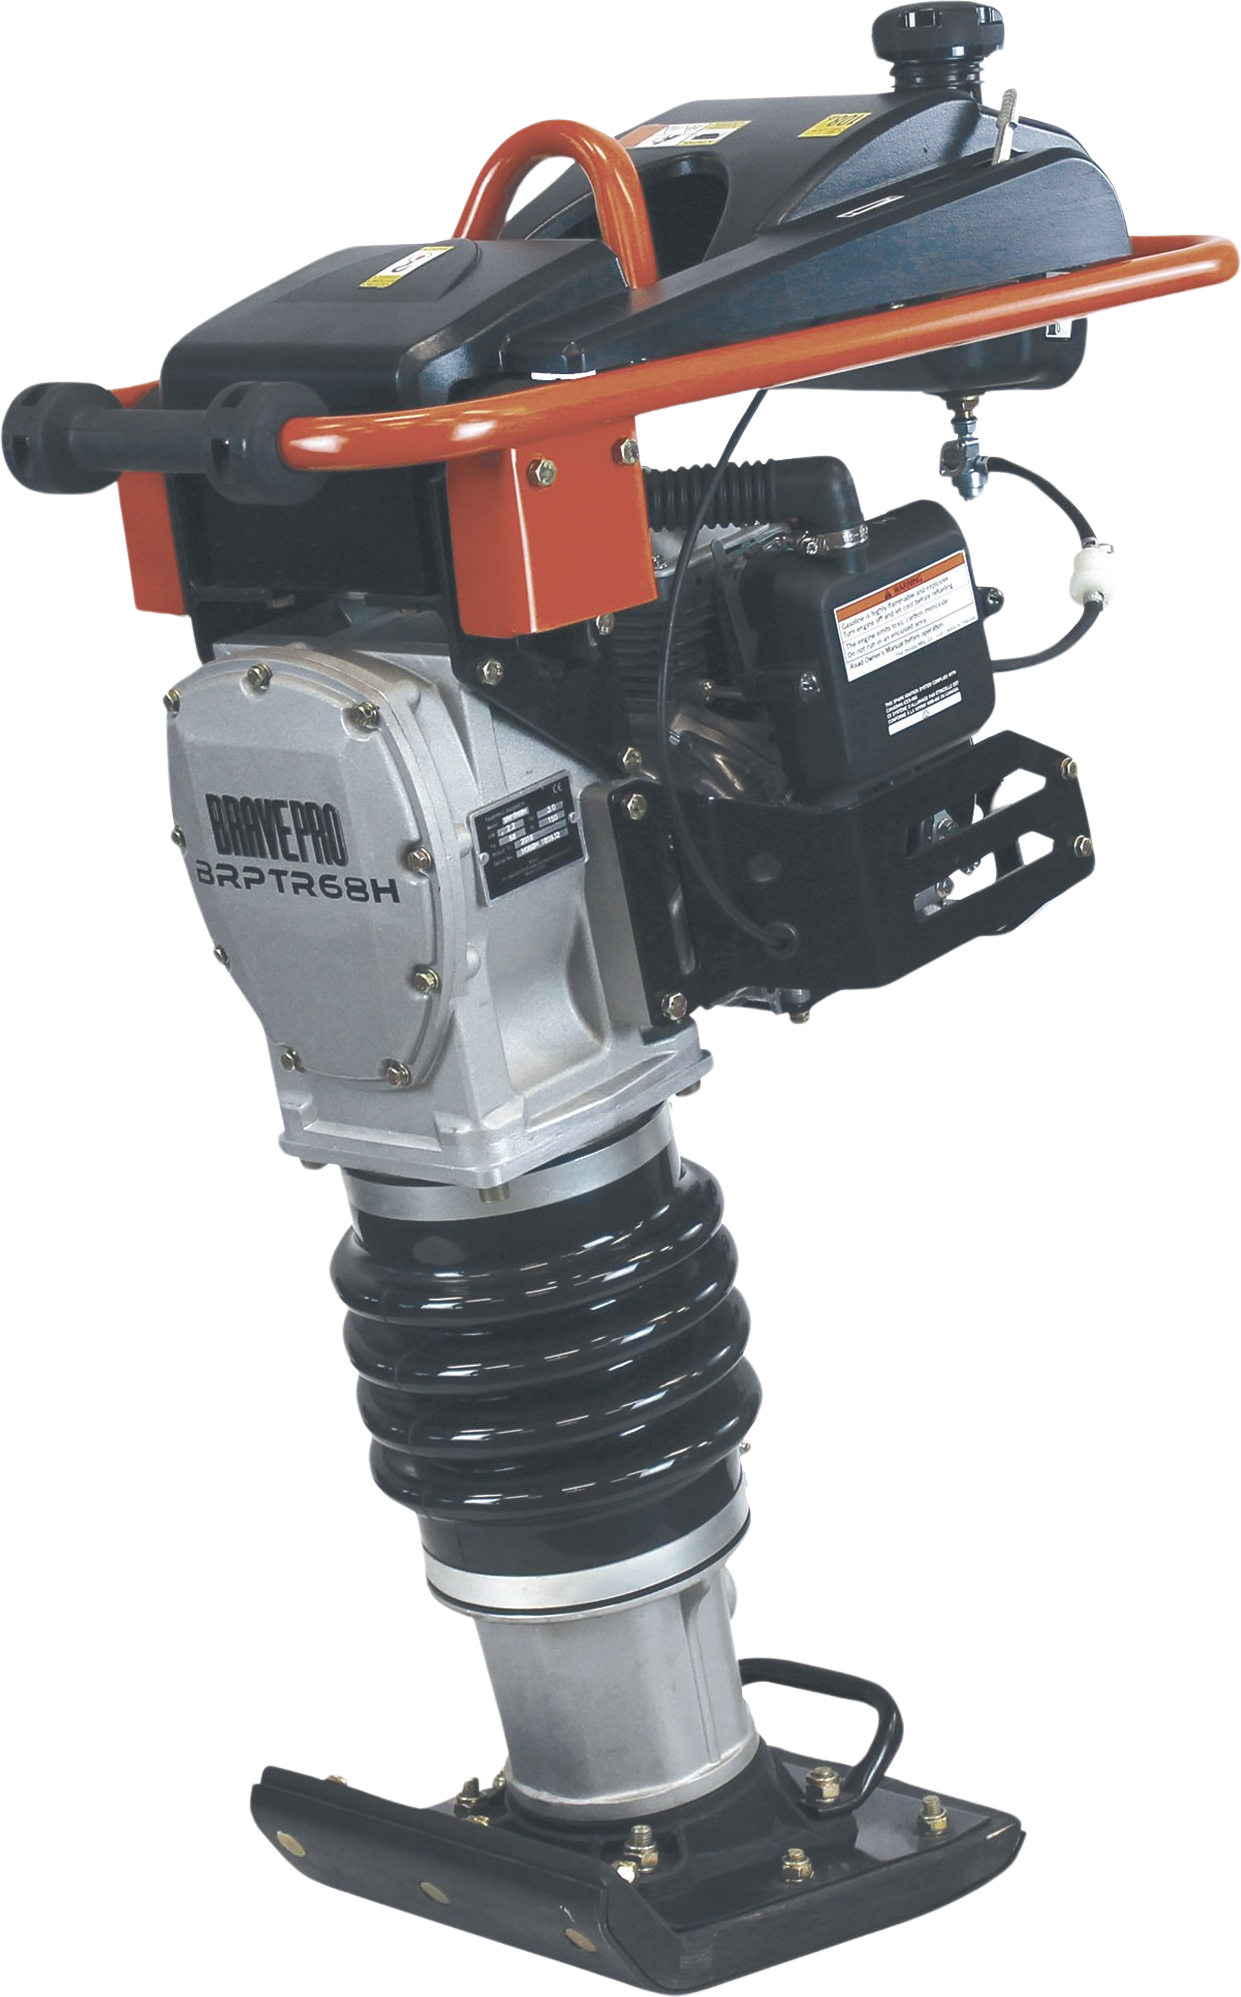 Brave Tamping Rammer 12.8 kN with Honda GX100 2878 lbs Impact Force 100cc BRPTR68H New